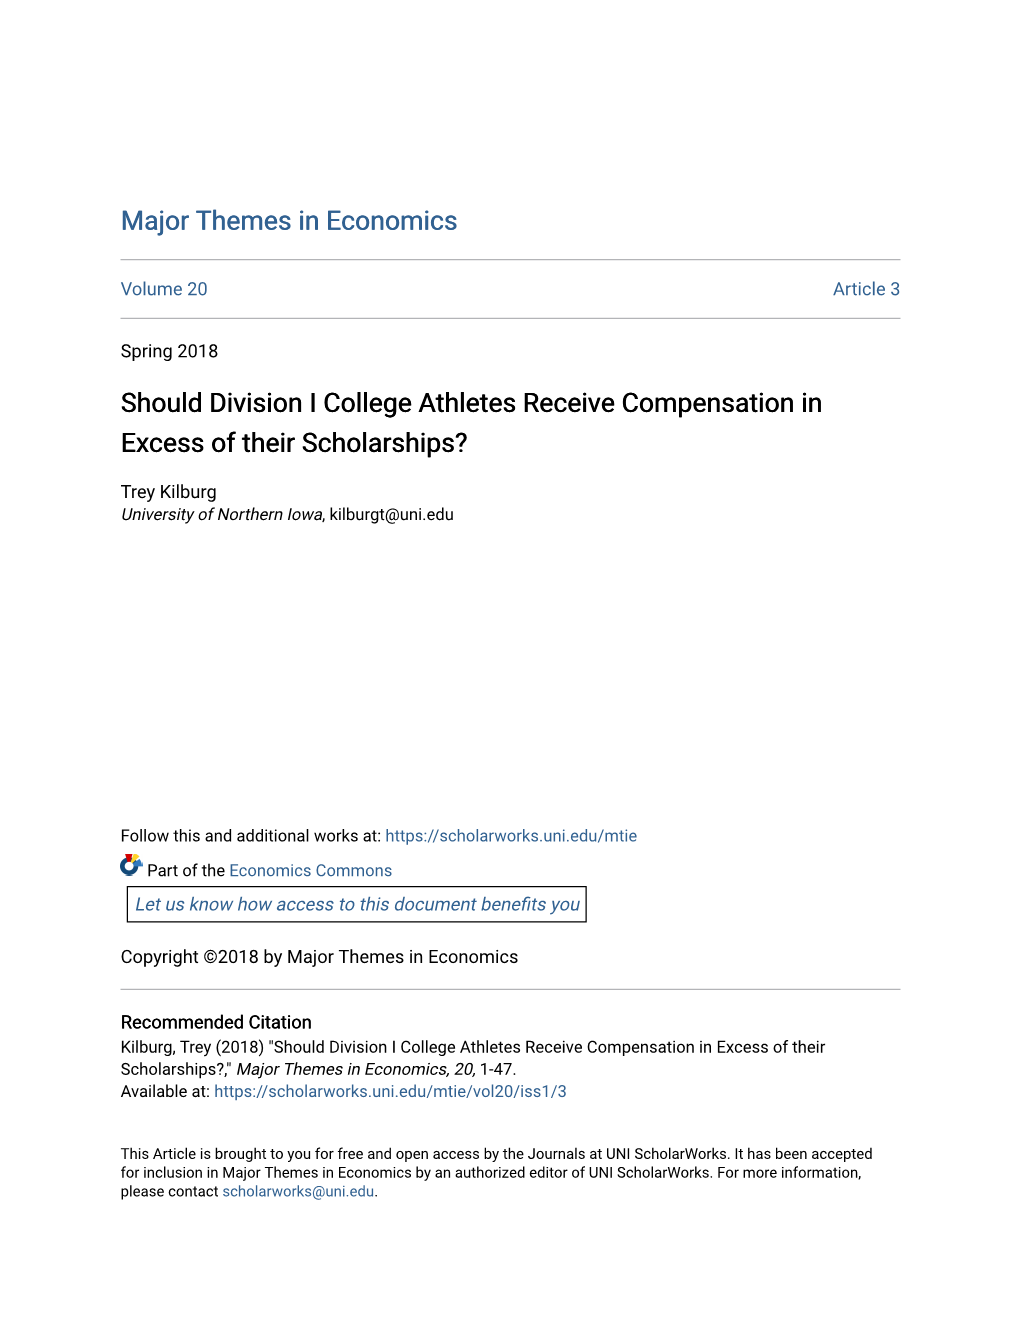 Should Division I College Athletes Receive Compensation in Excess of Their Scholarships?